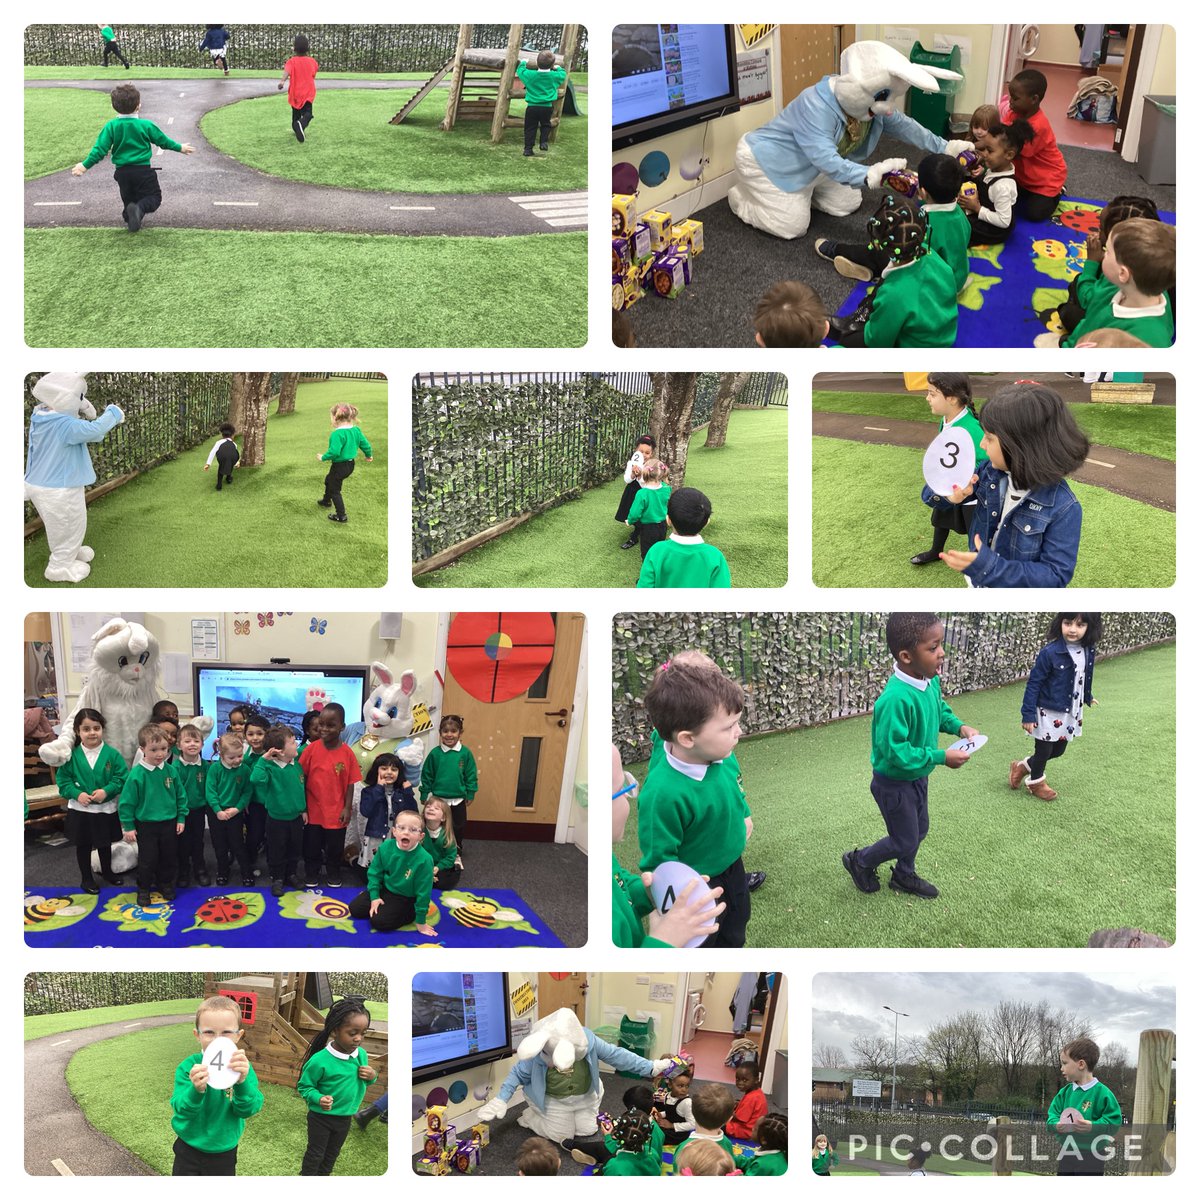 We had such fun hunting eggs with the Easter bunny this morning #stdavidsciwtafffechan